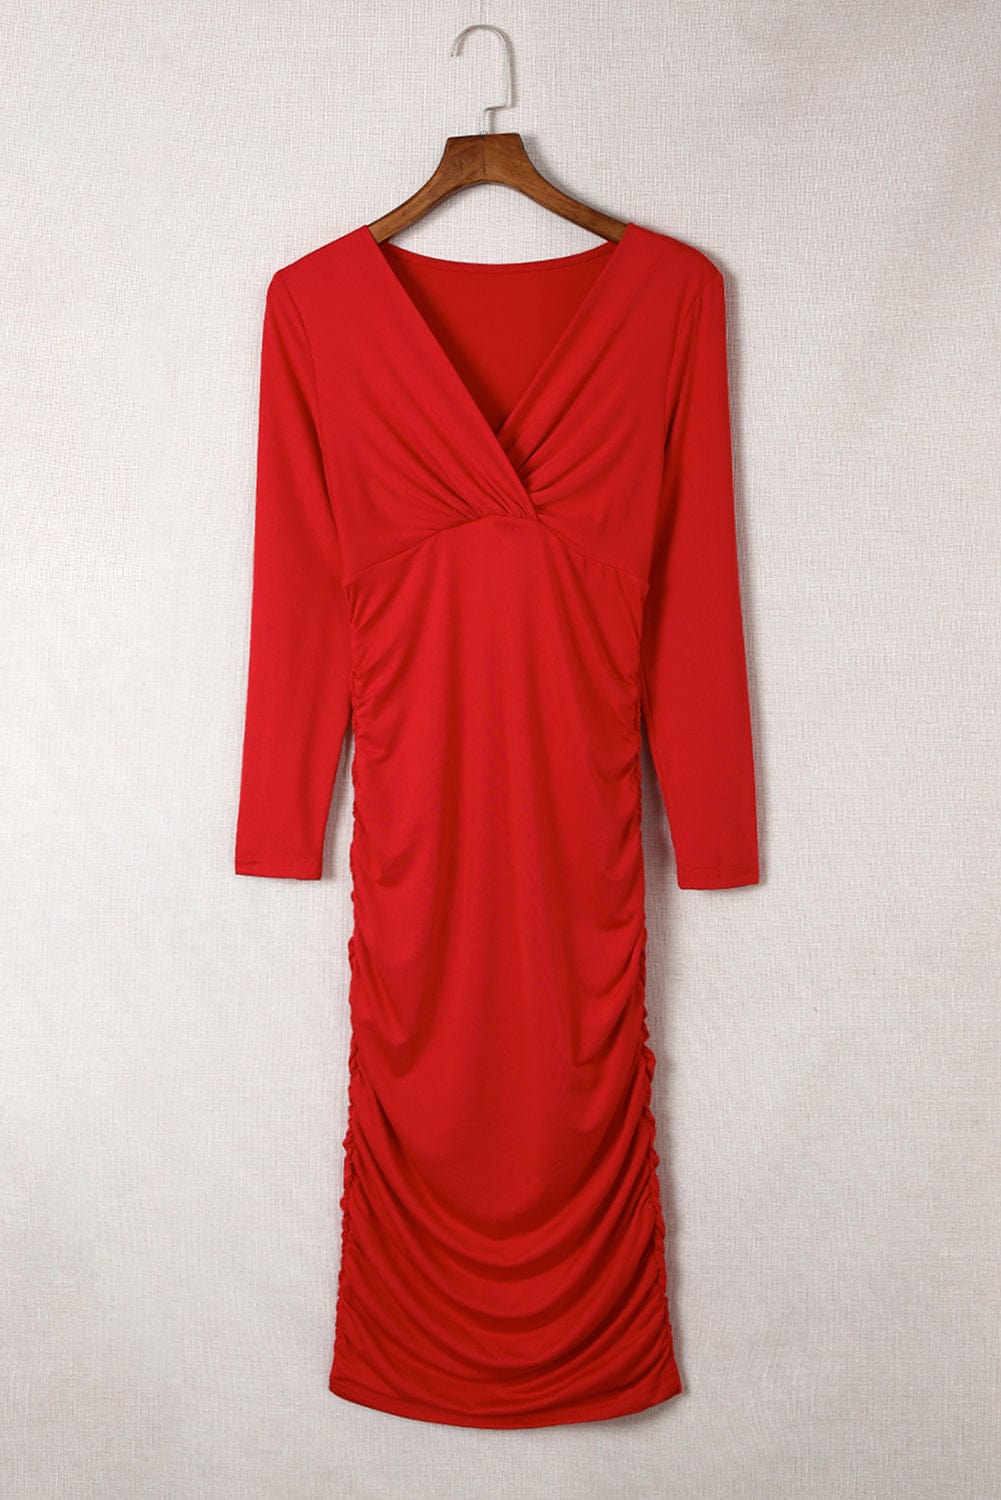 Shoppe EZR Dresses Fiery Red Long Sleeves Wrap V Neck Ruched Sheath Bodycon Dress